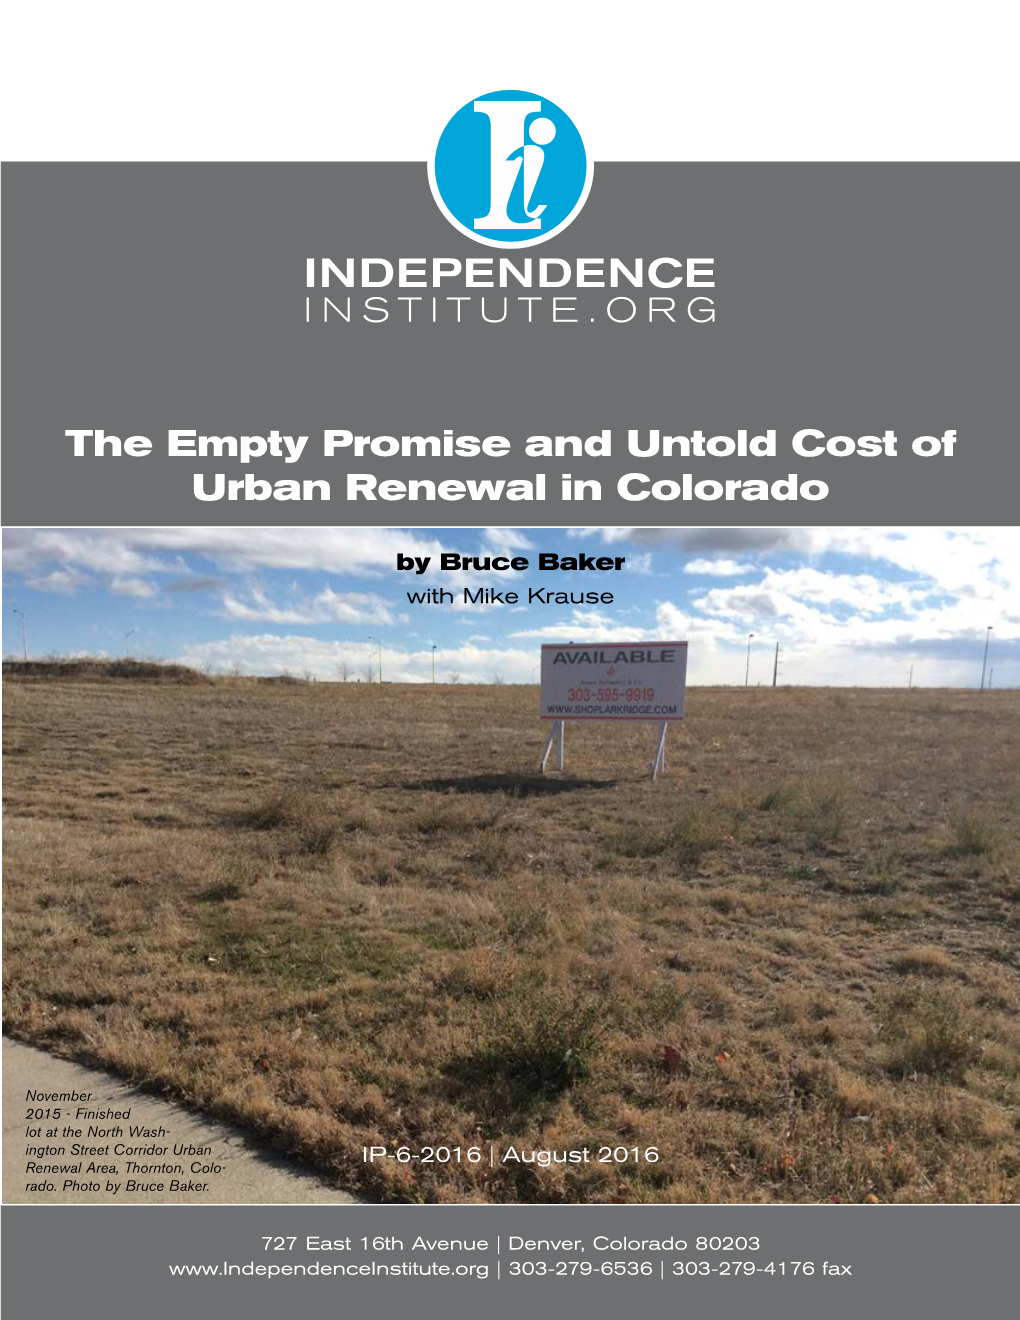 The Empty Promise and Untold Cost of Urban Renewal in Colorado